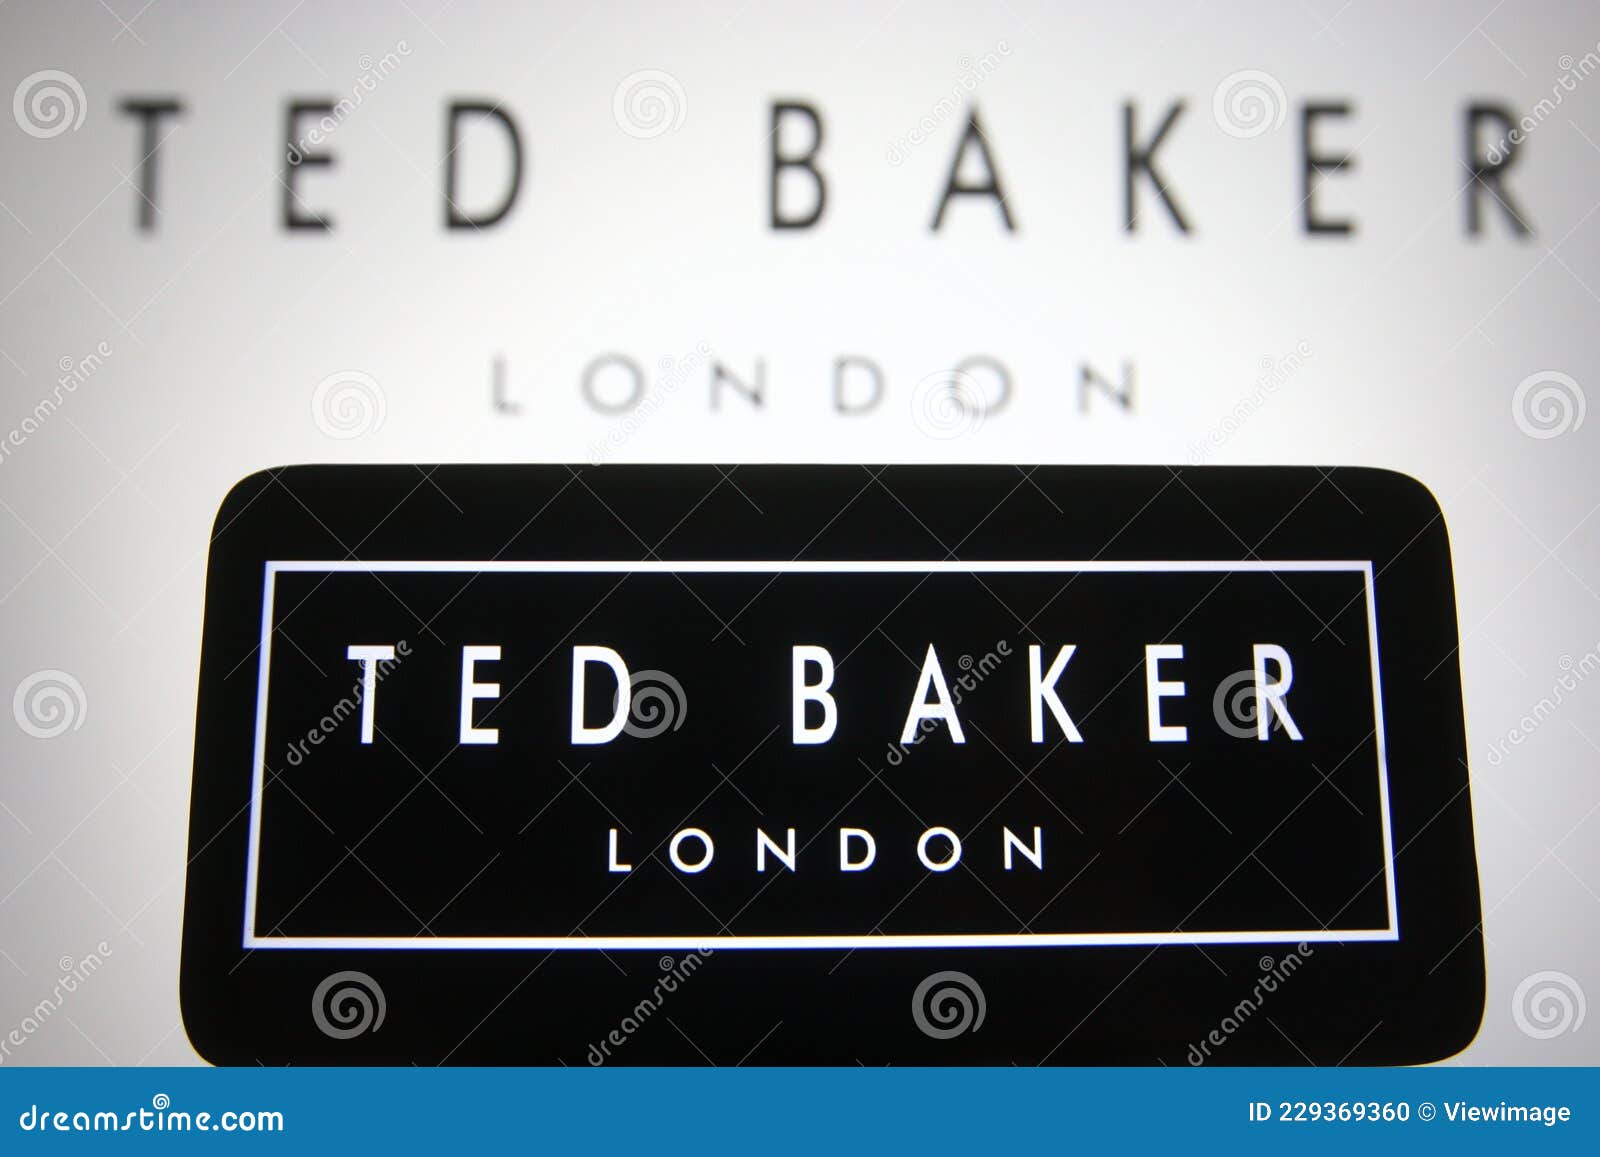 Ted Baker plc logo editorial image. Image of concept - 229369360